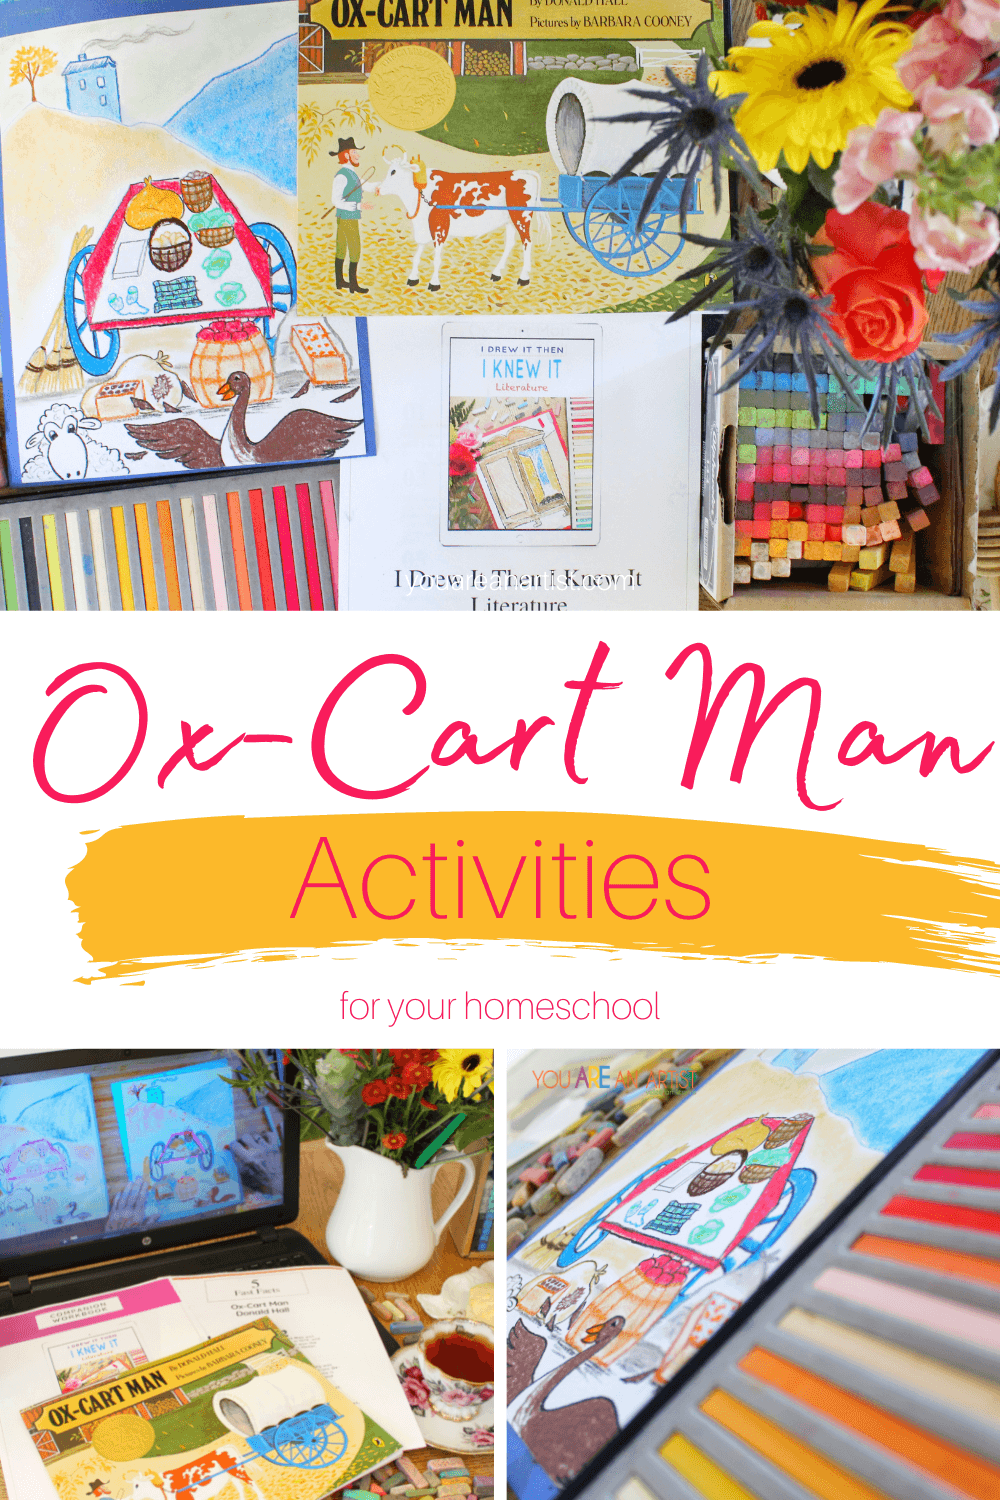 Ox-Cart Man Activities For Your Homeschool: Take a trip back to the 1800s with a New England farmer in the Ox-Cart Man. In a time when you wove your own clothes, whittled your own broom, and split your own shingles, this lyrical story takes you on a journey through the changing seasons. These activities are sure to bring the Ox-Cart Man to life! #chalkpastels #YouAREAnArtist #OxCartMan #OxCartManActivities #videoartlessons #homeschool #changingseasons #chalkpastelteatime 